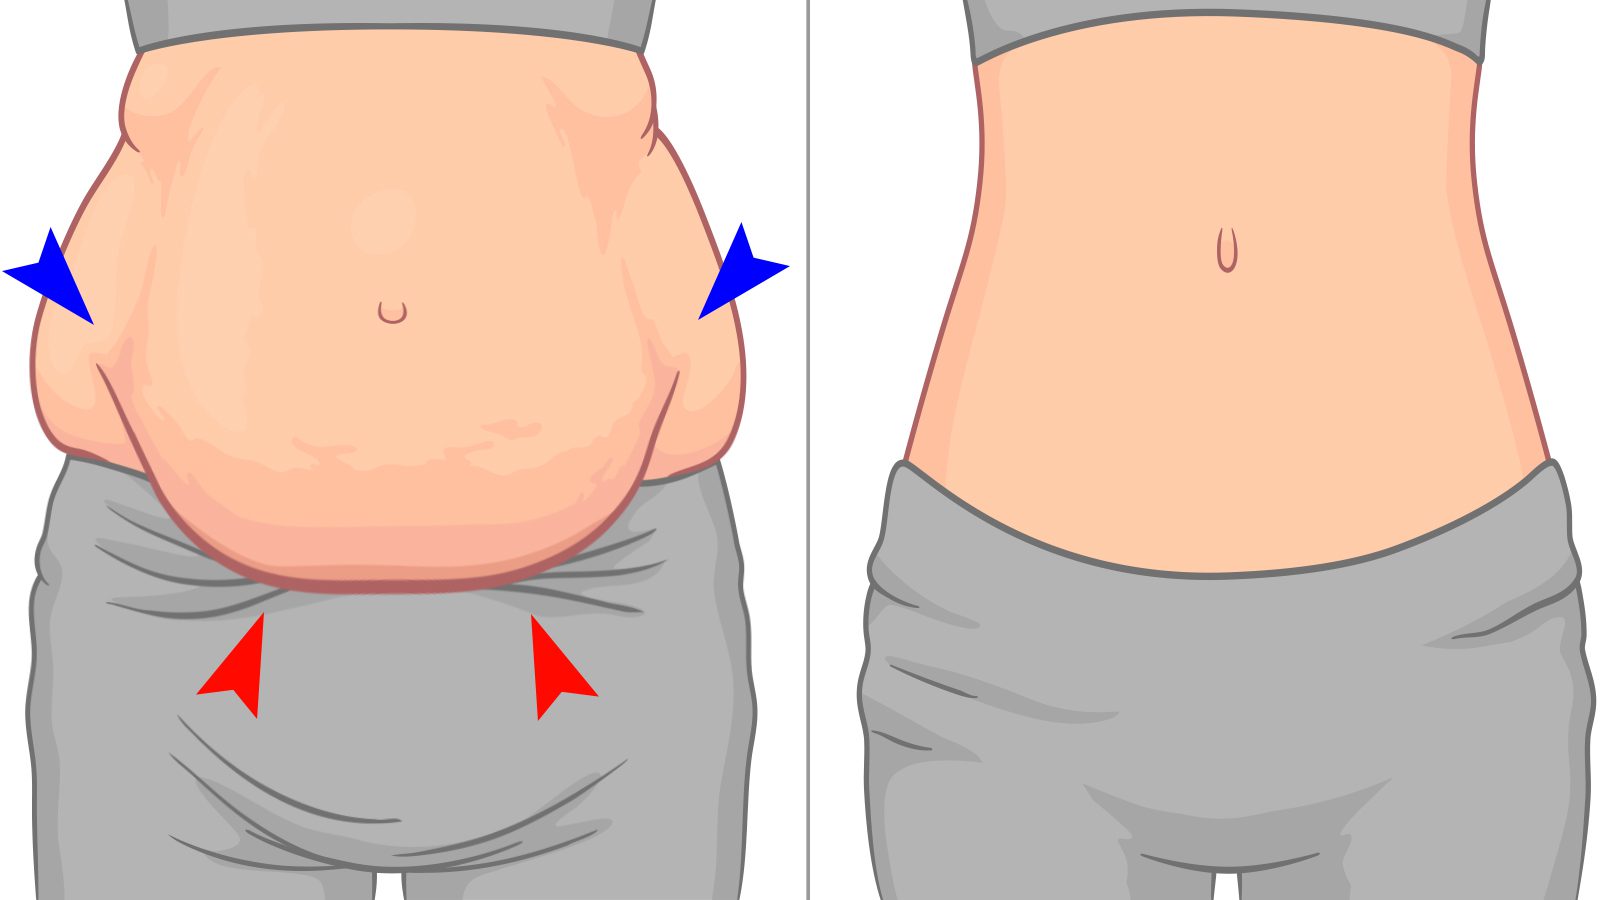 Belly fat reduction and overall health